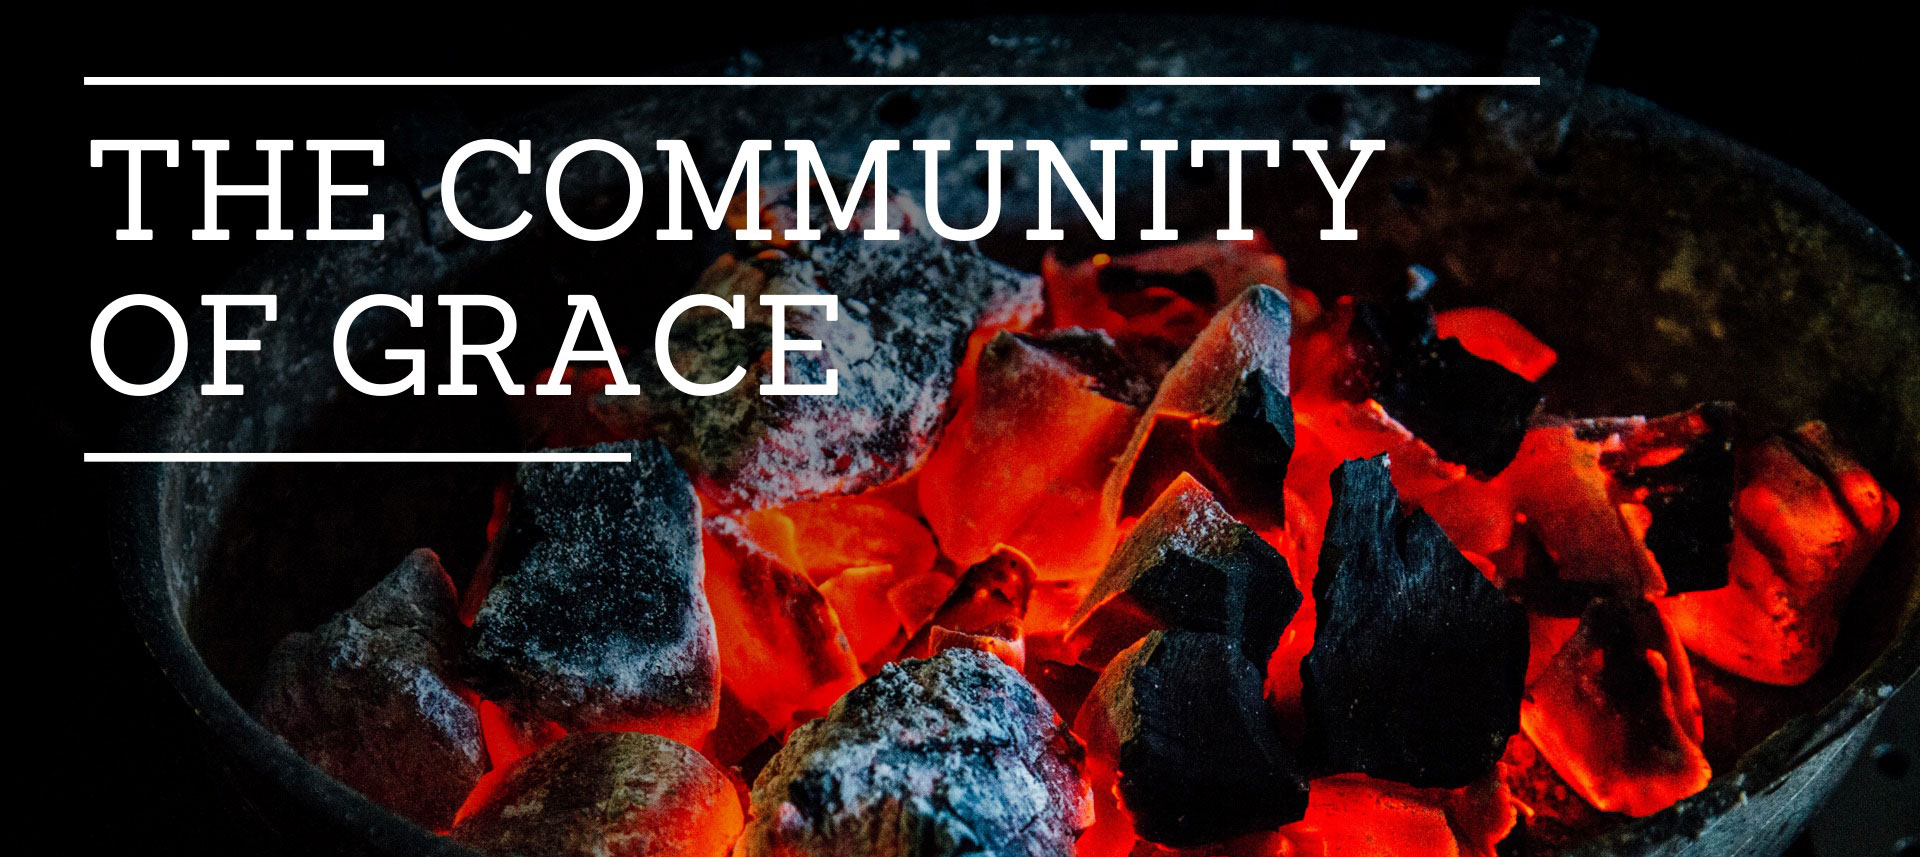 The Community of Grace